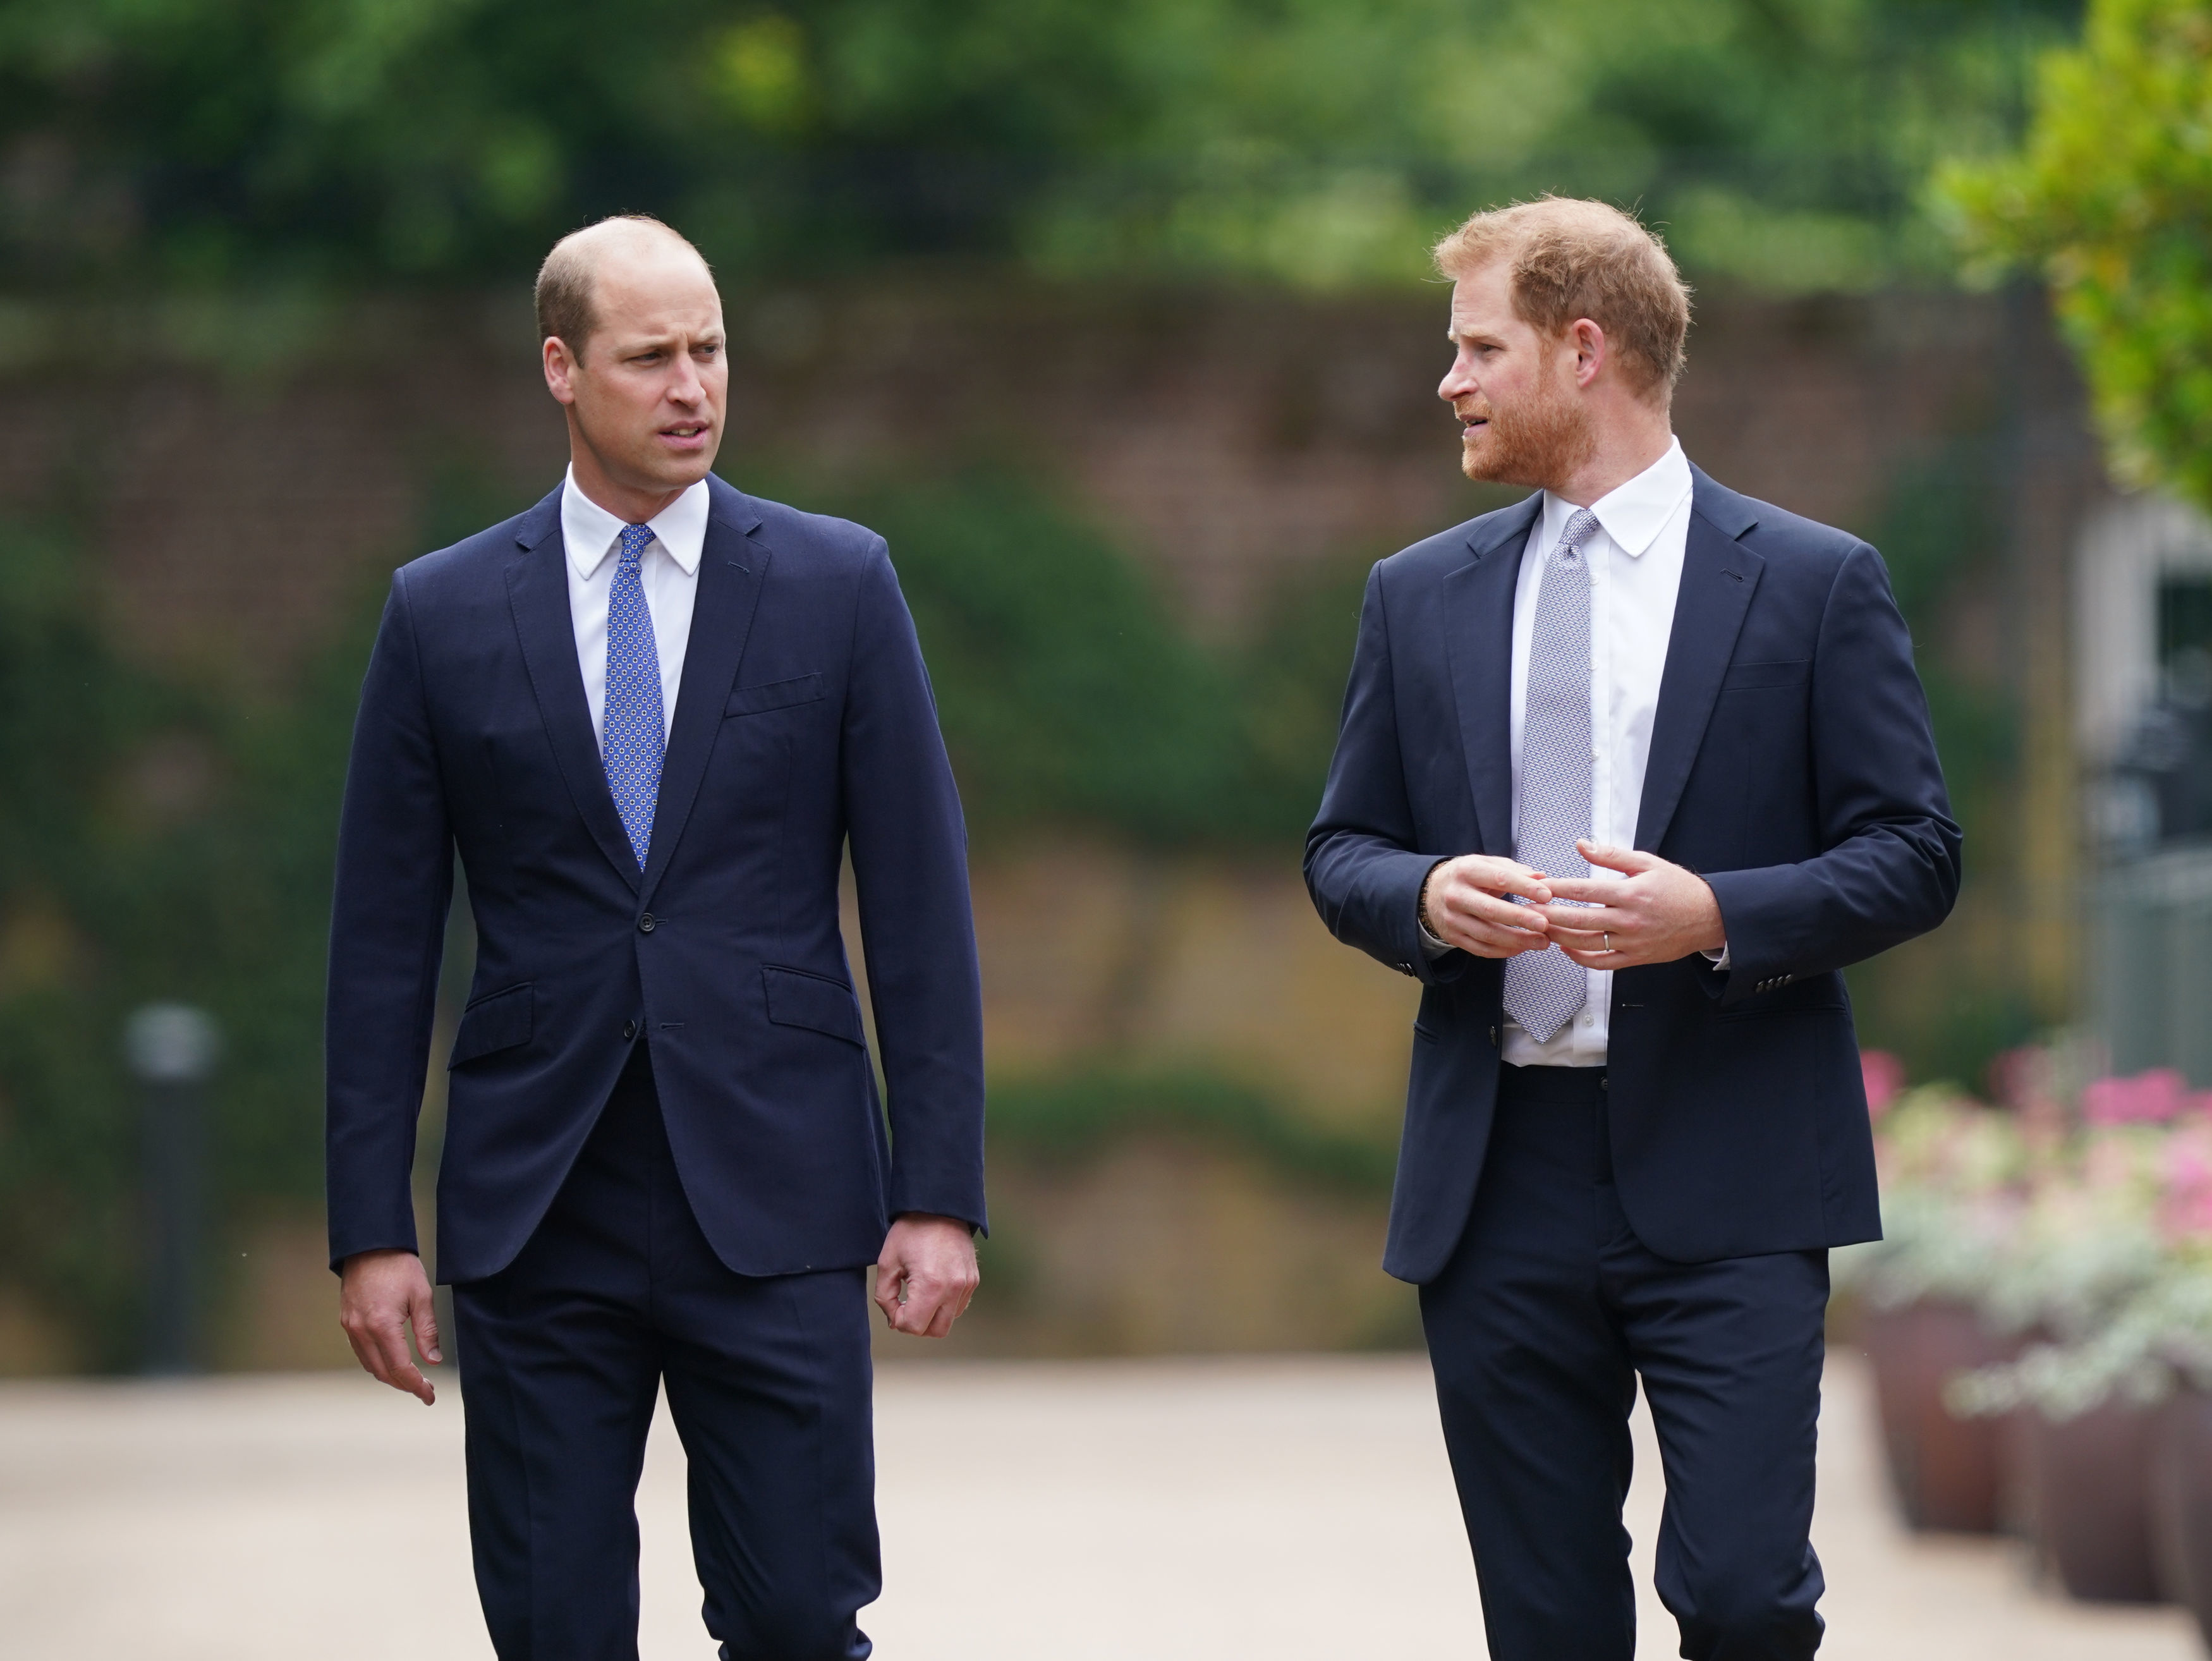 Prince William and Prince Harry arriving in the Sunken Garden at Kensington Palace for the unveiling of a statue of Princess Diana